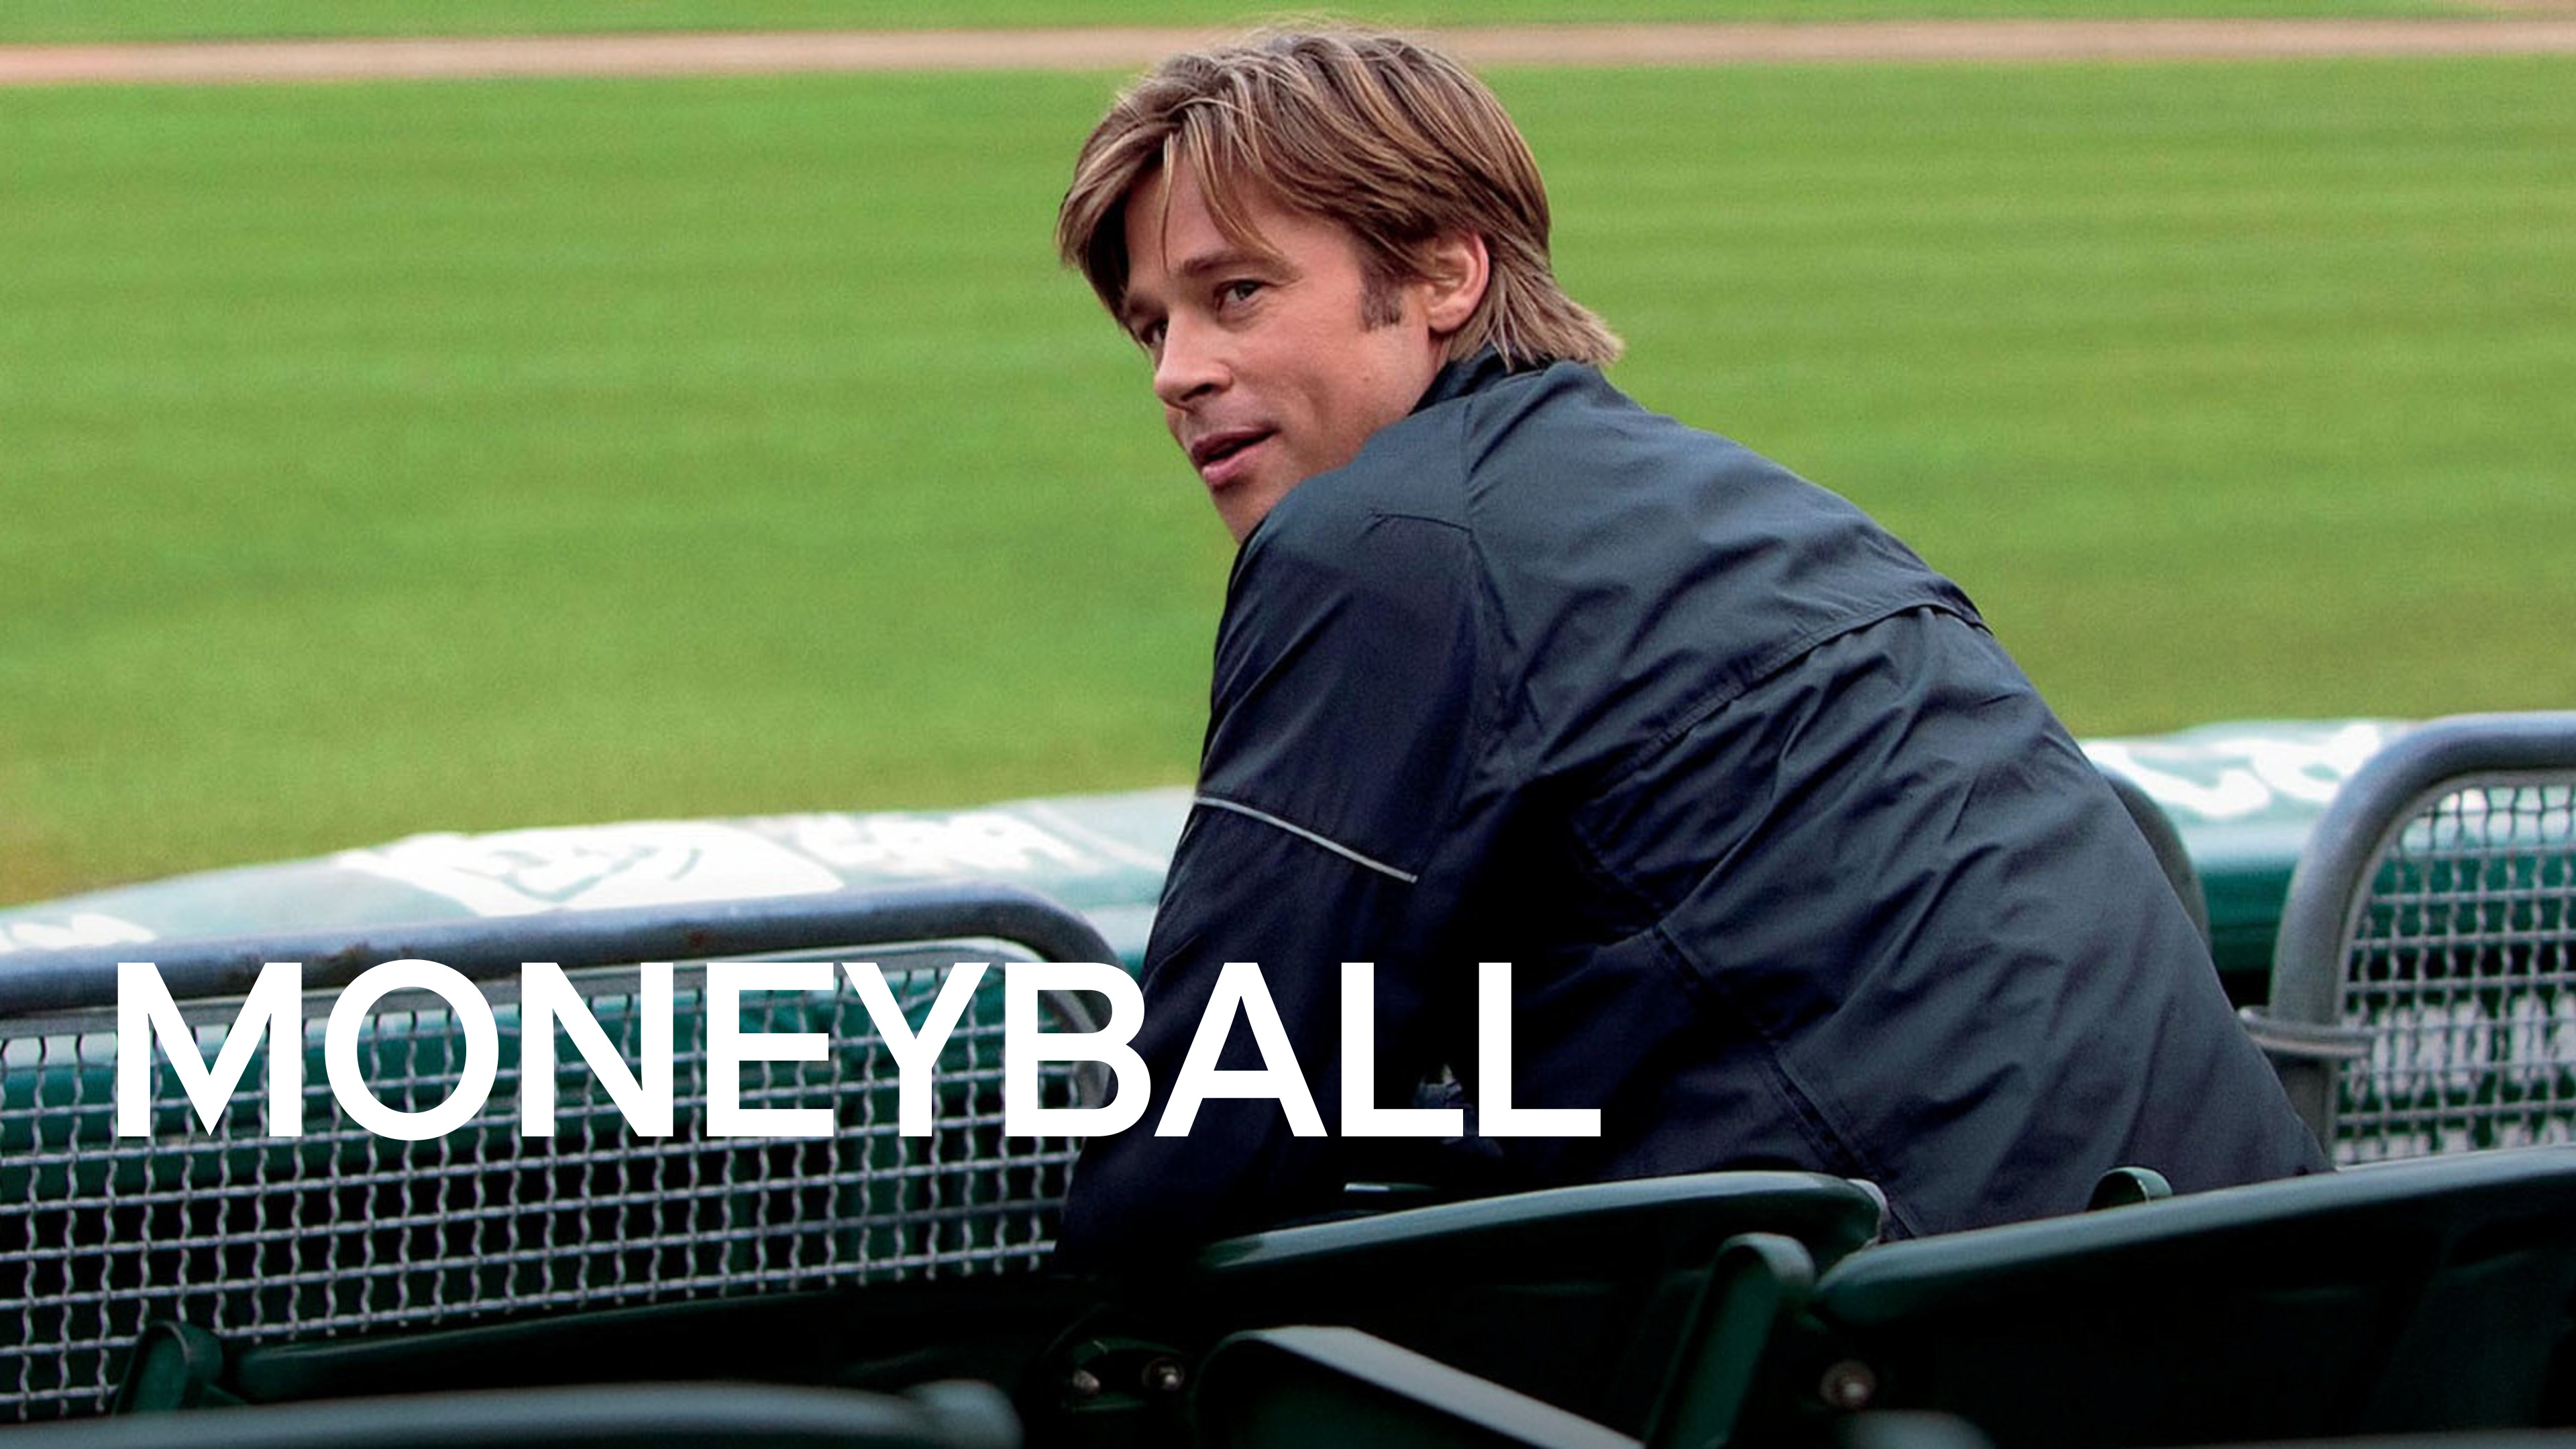 32-facts-about-the-movie-moneyball